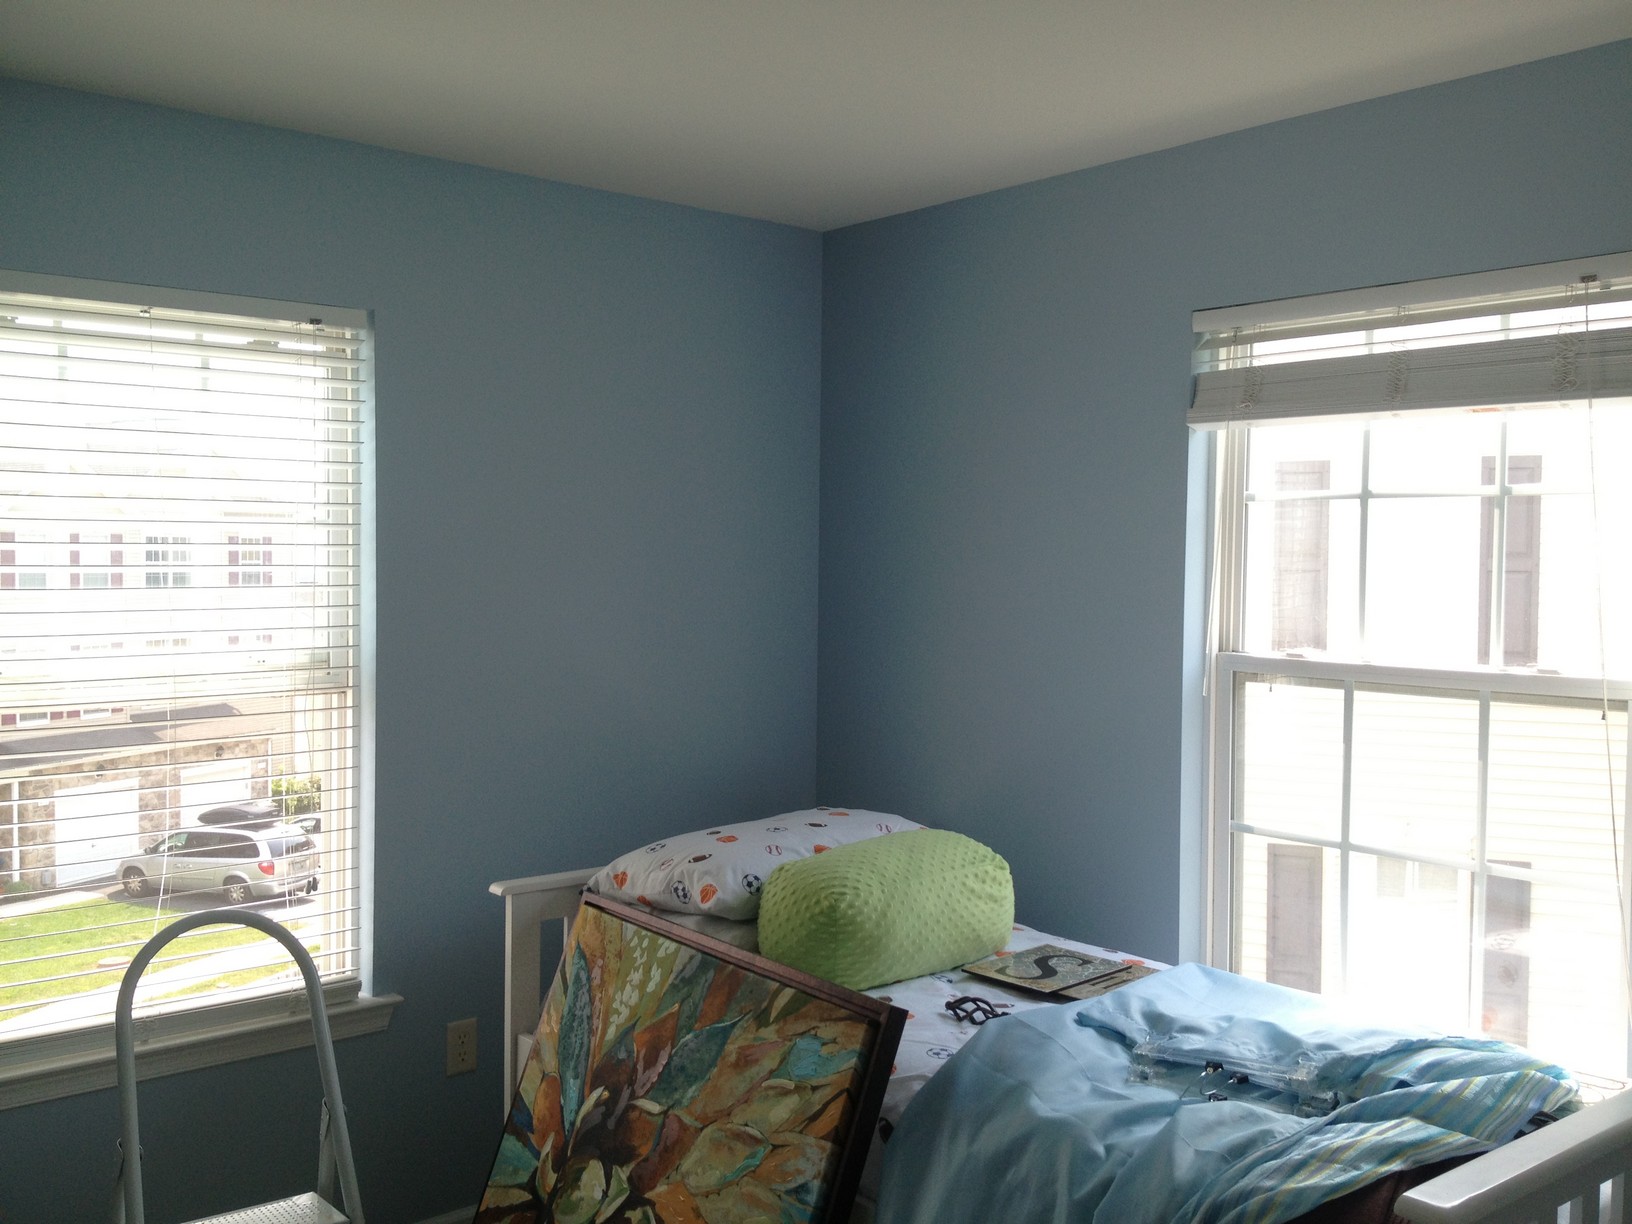 Interior painting services at Paramount Painters in Pennsylvania and Maryland